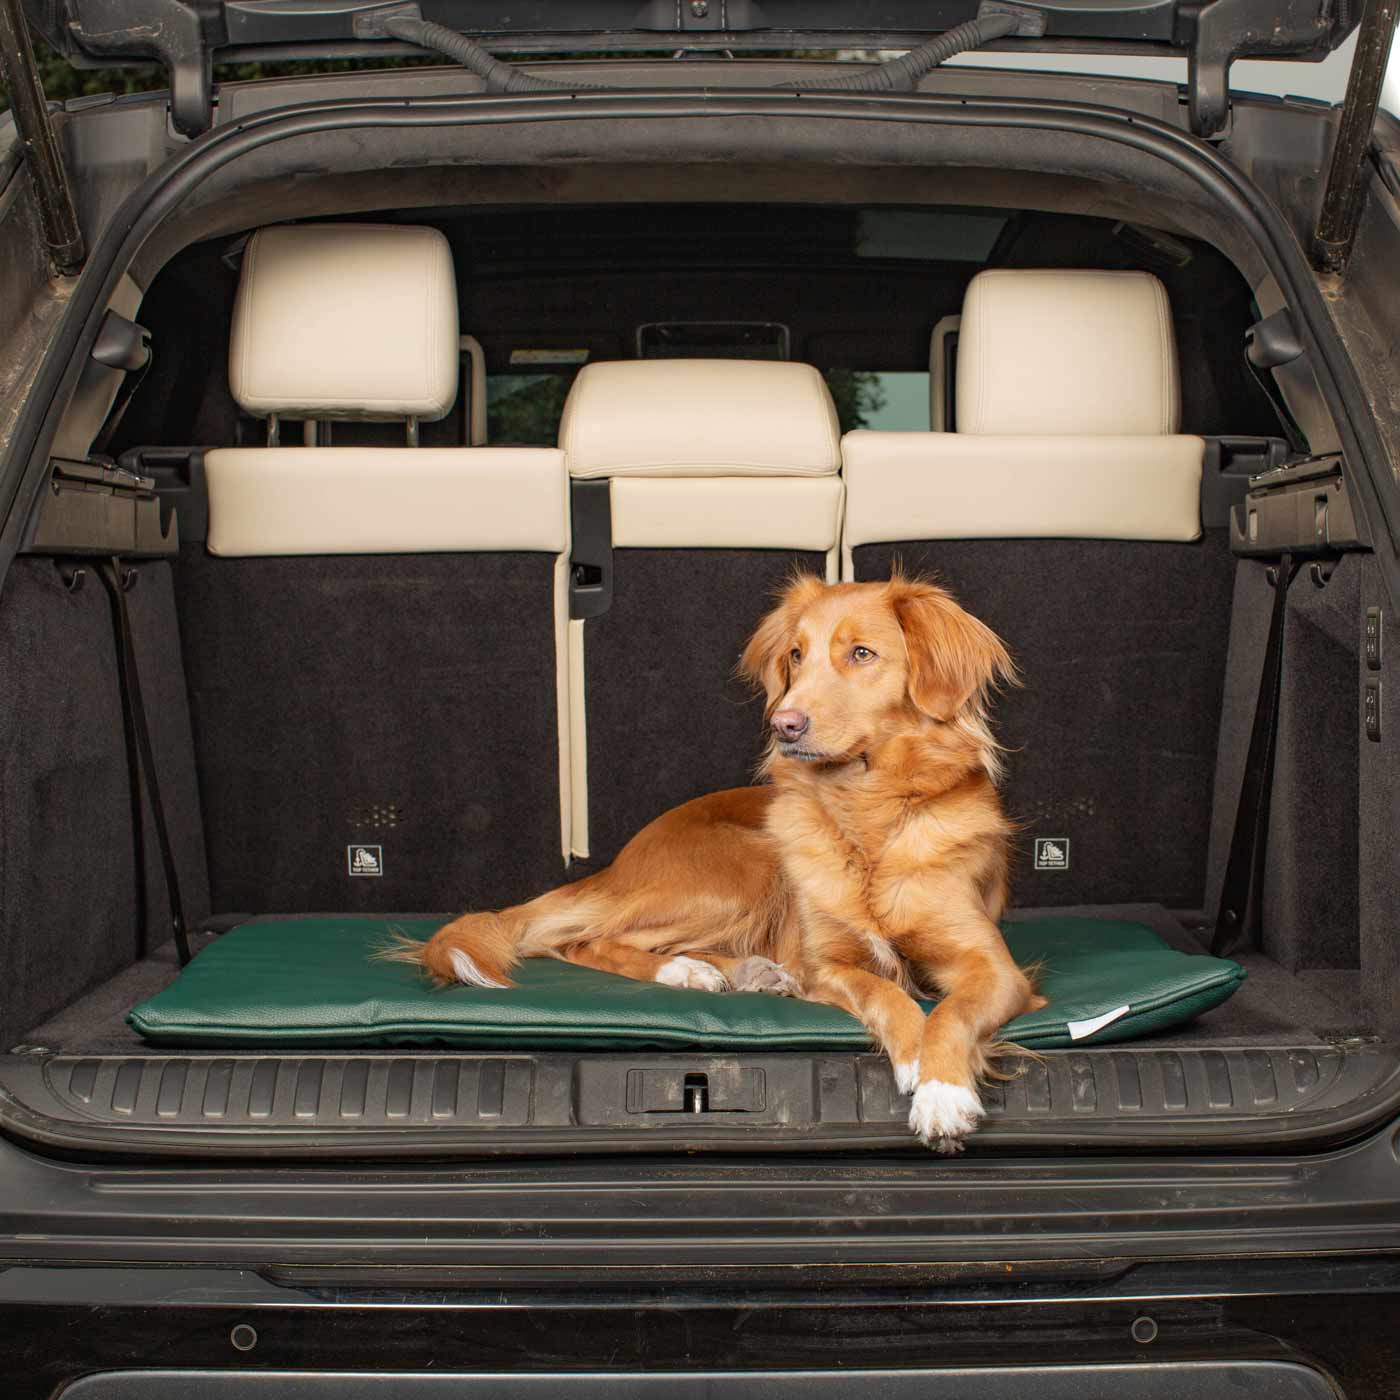 Embark on the perfect pet travel with our luxury Travel Mat in Rhino Forest (Green). Featuring a Carry handle for on the move once Rolled up for easy storage, can be used as a seat cover, boot mat or travel bed! Available now at Lords & Labradors US